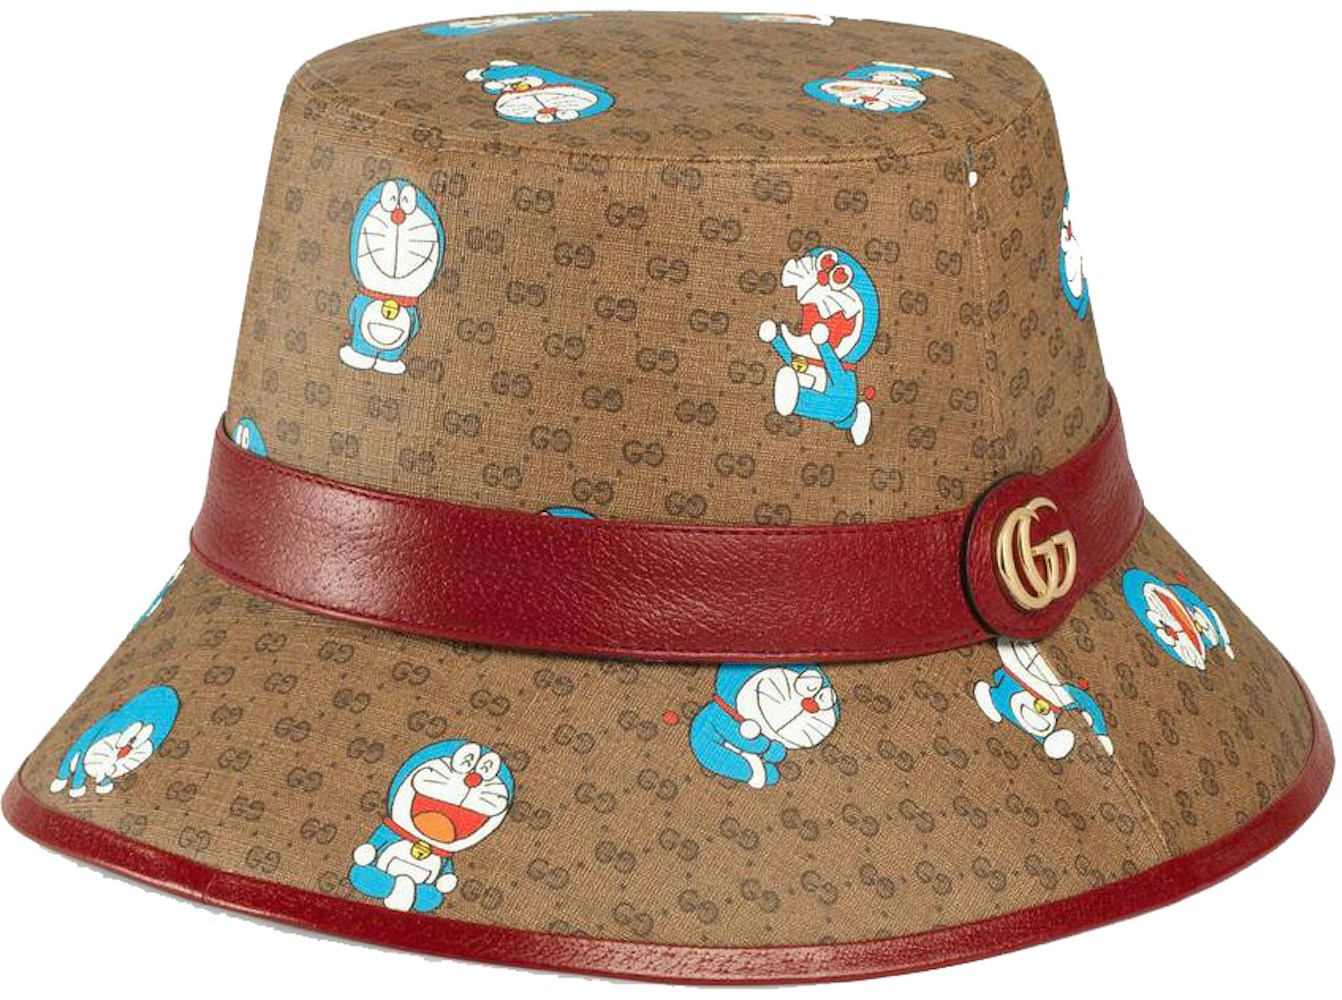 Doraemon Hat in Canvas with Gold-tone